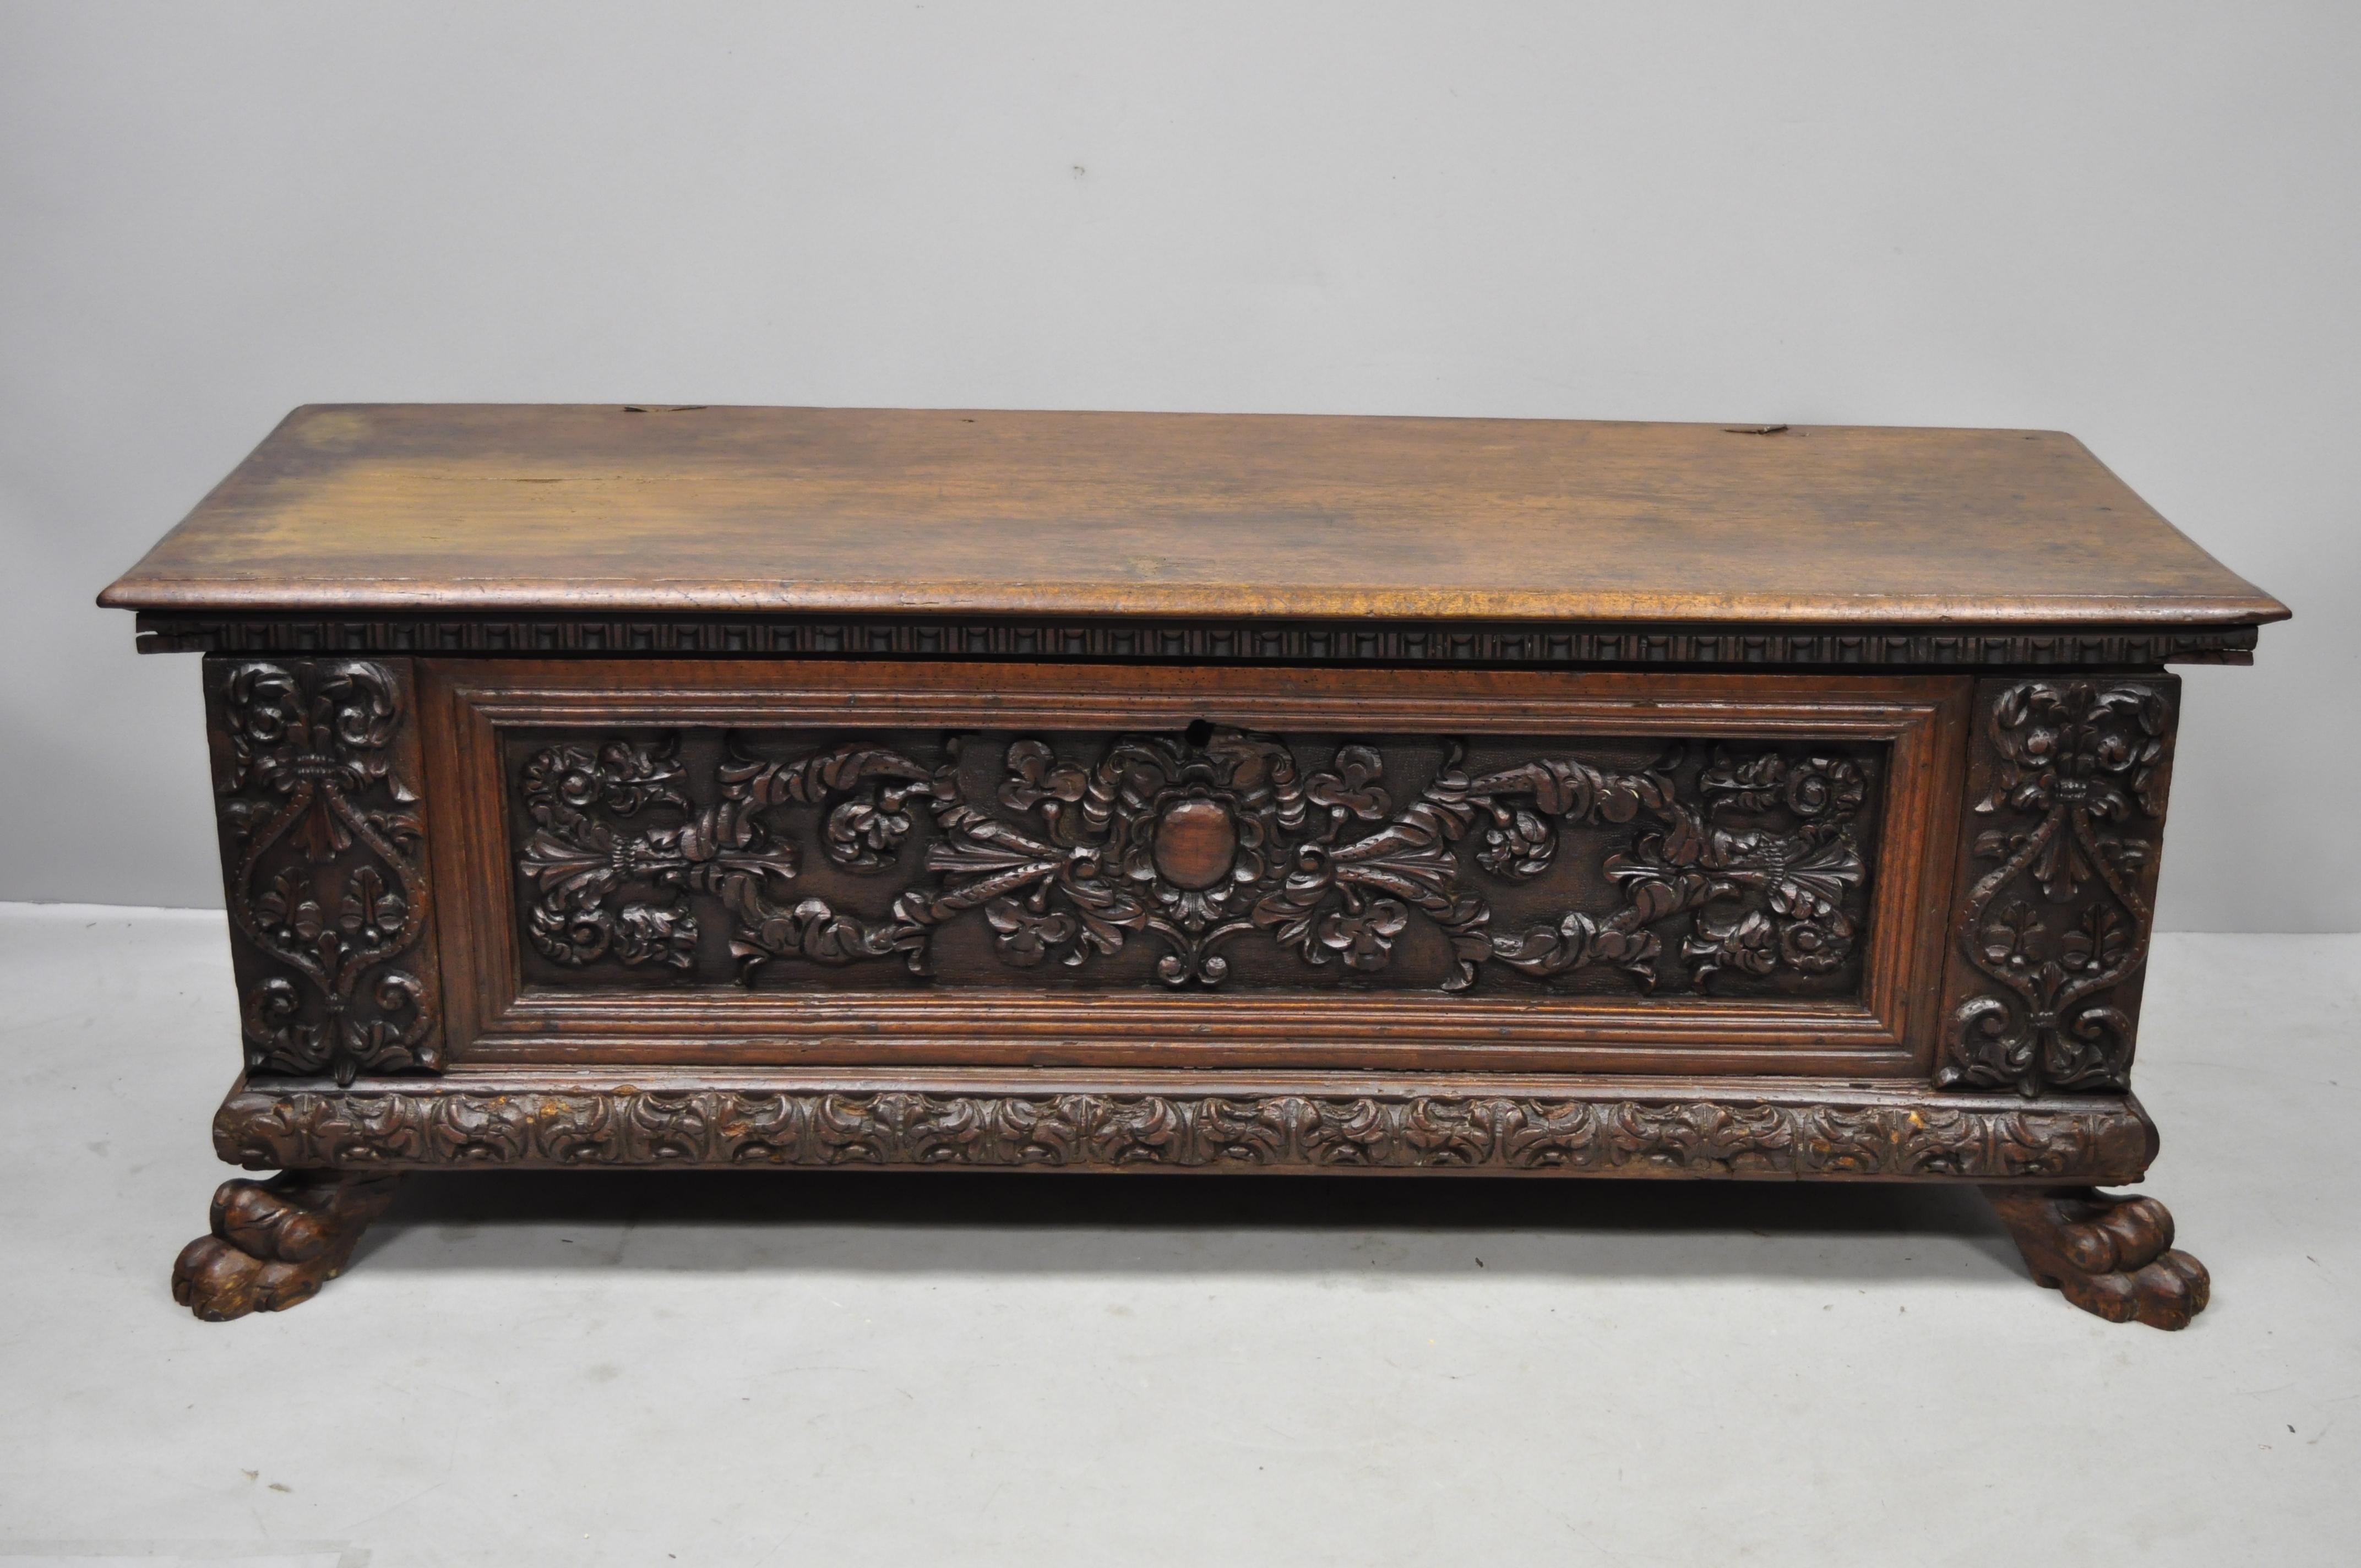 18th century French Renaissance carved walnut paw foot coffer trunk blanket chest. Item features ornate carved flowers and scrollwork, solid wood construction, beautiful wood grain, no key, but unlocked, carved paw feet, very nice antique item,